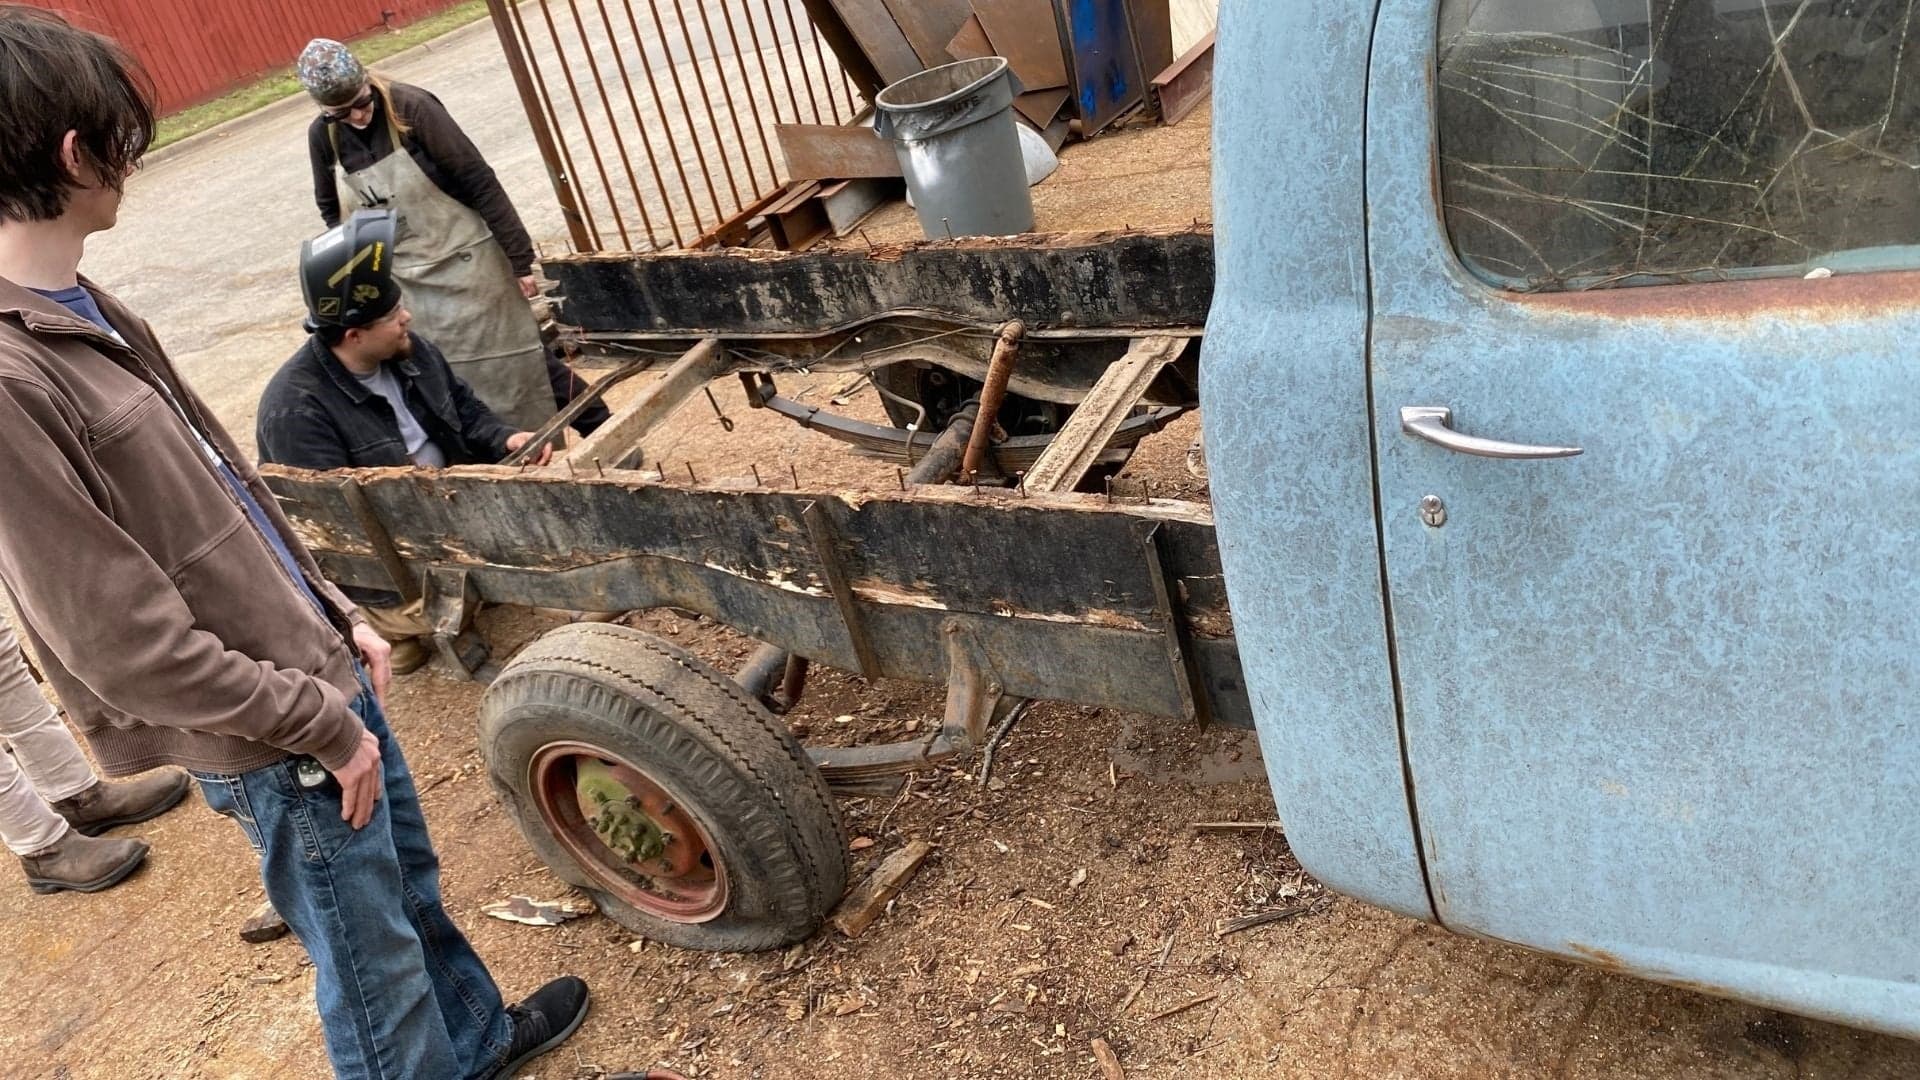 These Texas Shop Students Are Learning to Weld on an Abandoned 1951 Studebaker Ranch Truck